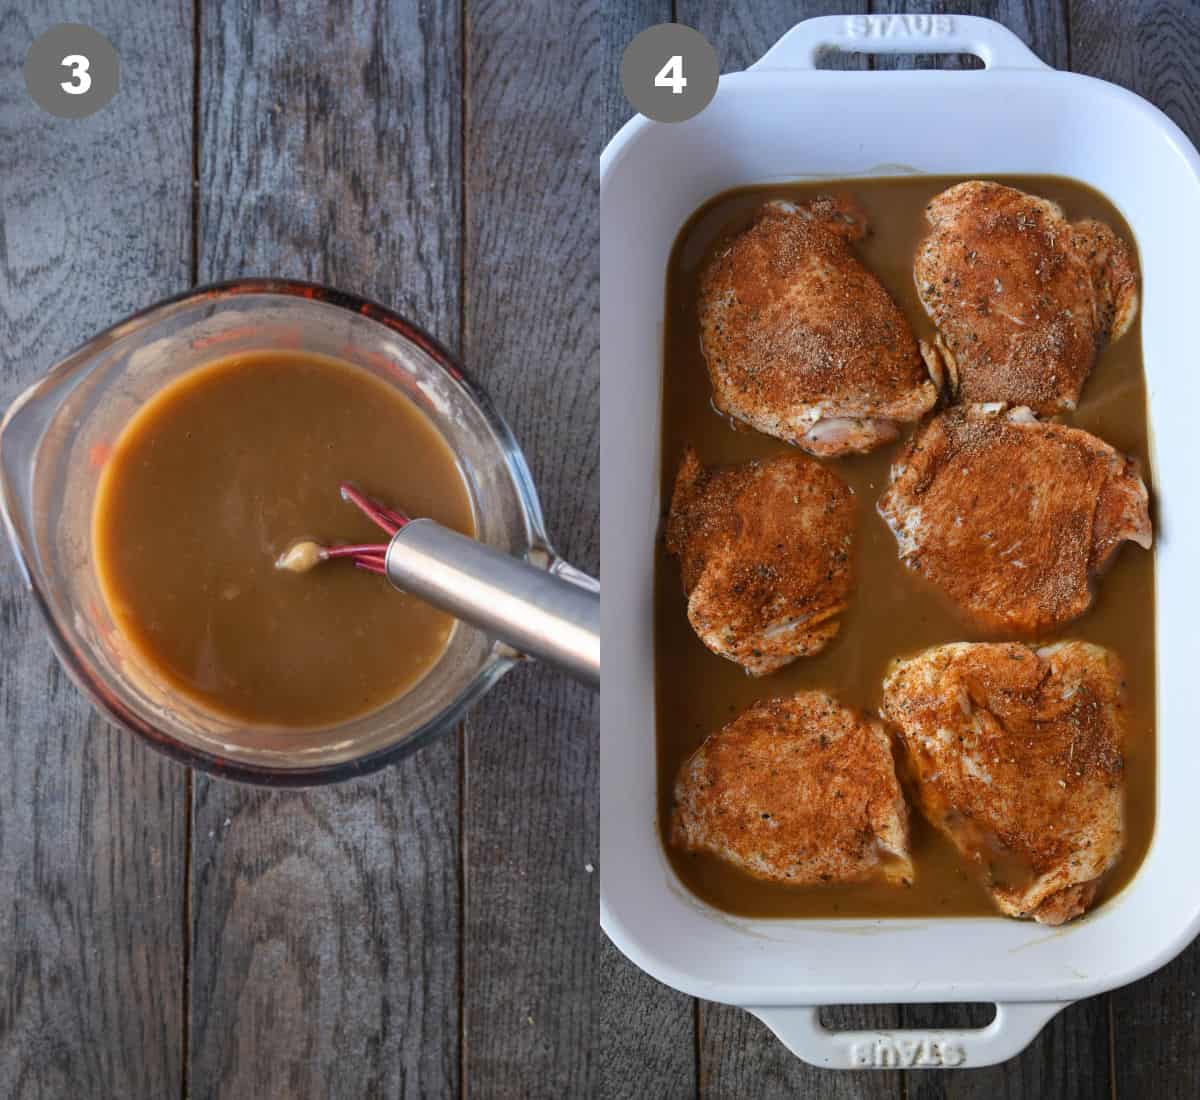 Gravy ingredients mixed into a large measuring cup. Then poured into a baking dish and chicken placed on top.